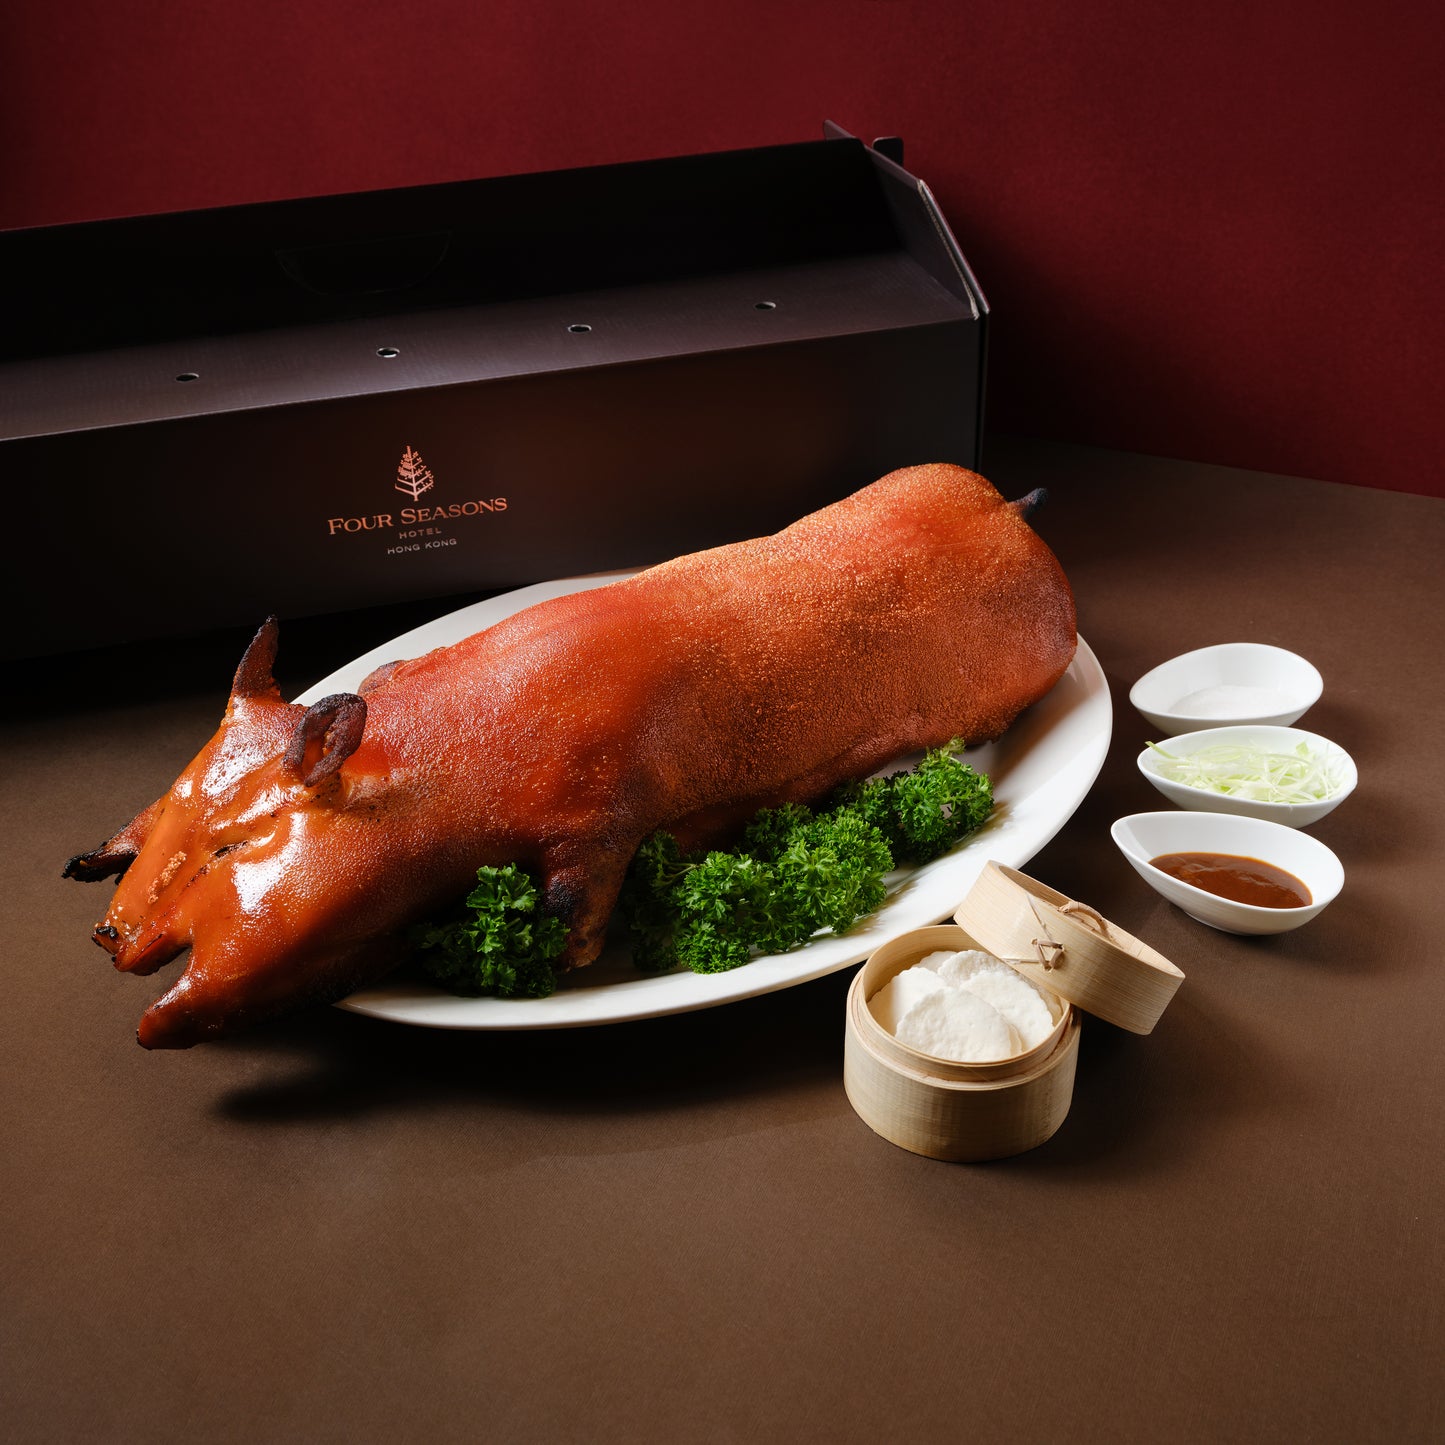 Four Seasons Roasted Suckling Pig with Condiments (Whole, 2.2 - 2.4kg) 原隻乳豬連配料 (2.2 - 2.4公斤)